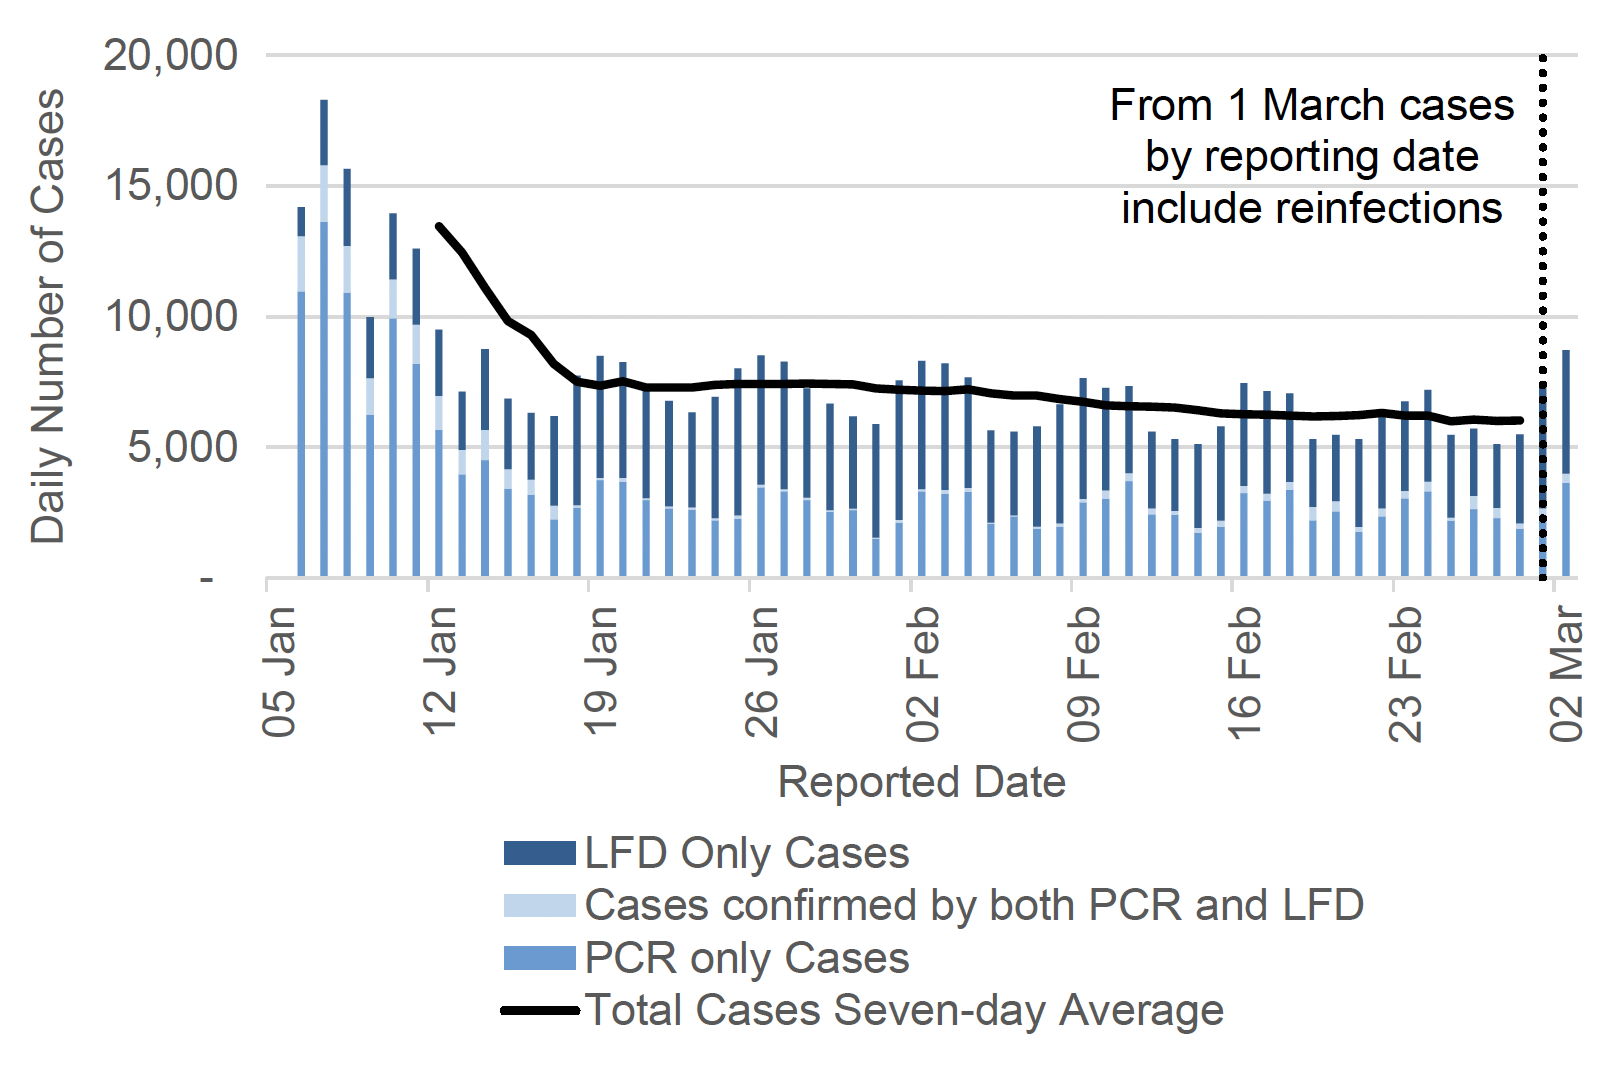 a bar chart showing daily PCR and LFD case numbers by reporting date from 5 January to 2 March 2022 with a line showing 7 day average total number of positive cases. While the number of daily reported cases fluctuate throughout the week, the total-seven day average has been on a decreasing trend since early January, with a slight increase visible in early March. The chart has a note that says: “from 1 March cases by reporting date include reinfections”. Before 1 March, the daily case number includes only first infections.